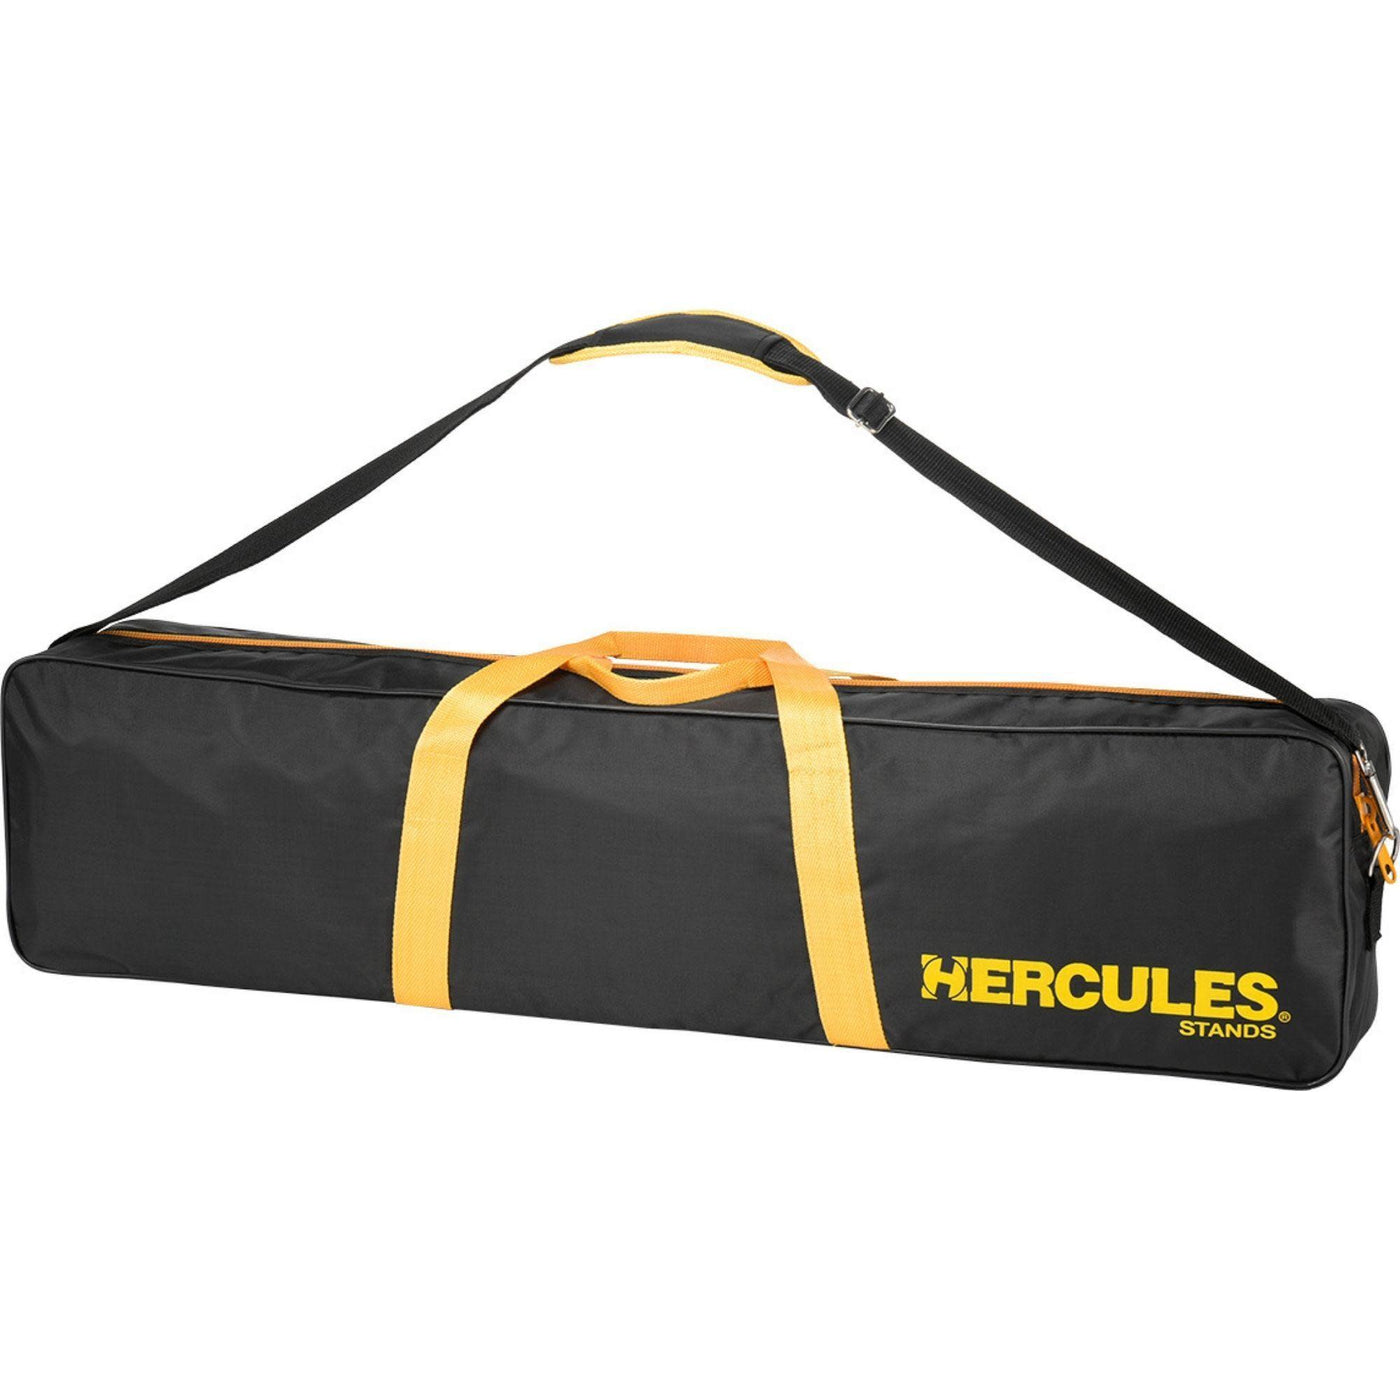 Hercules BSB001 Carrying Bag for Orchestra Stand